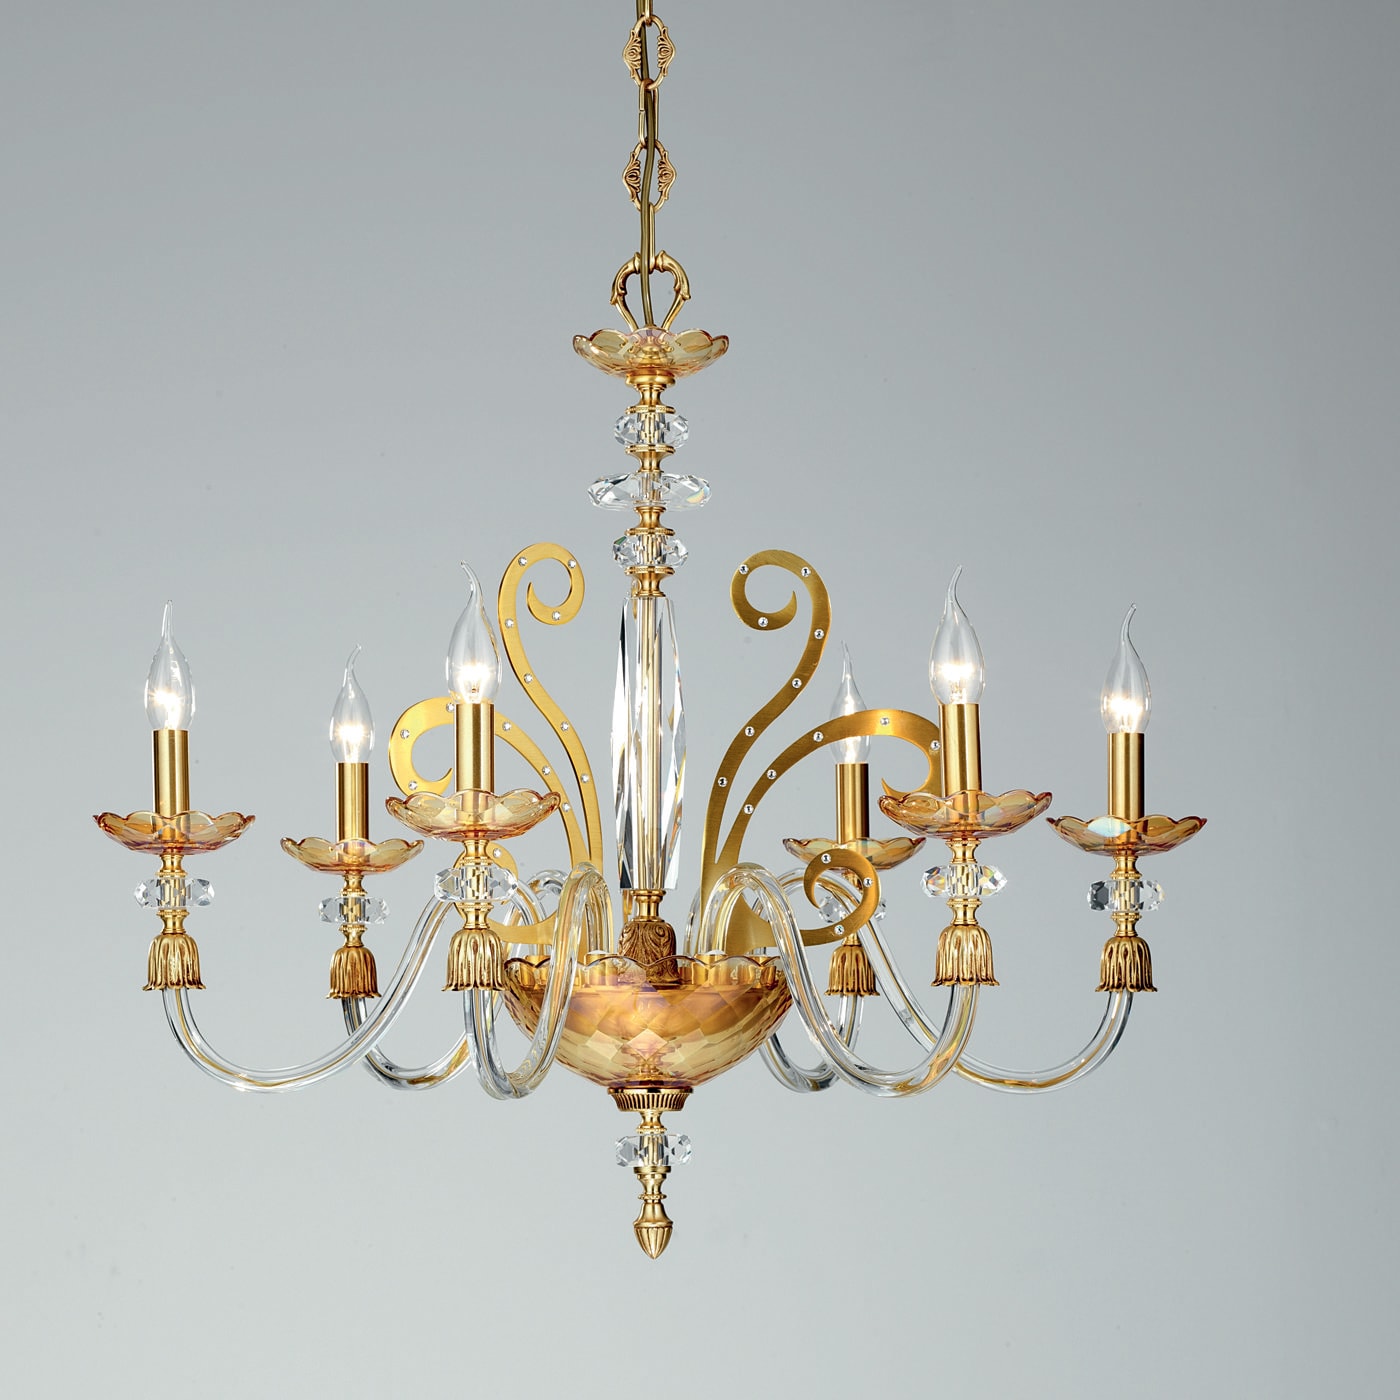 6 light chandelier in glass and gold - Modenese Gastone